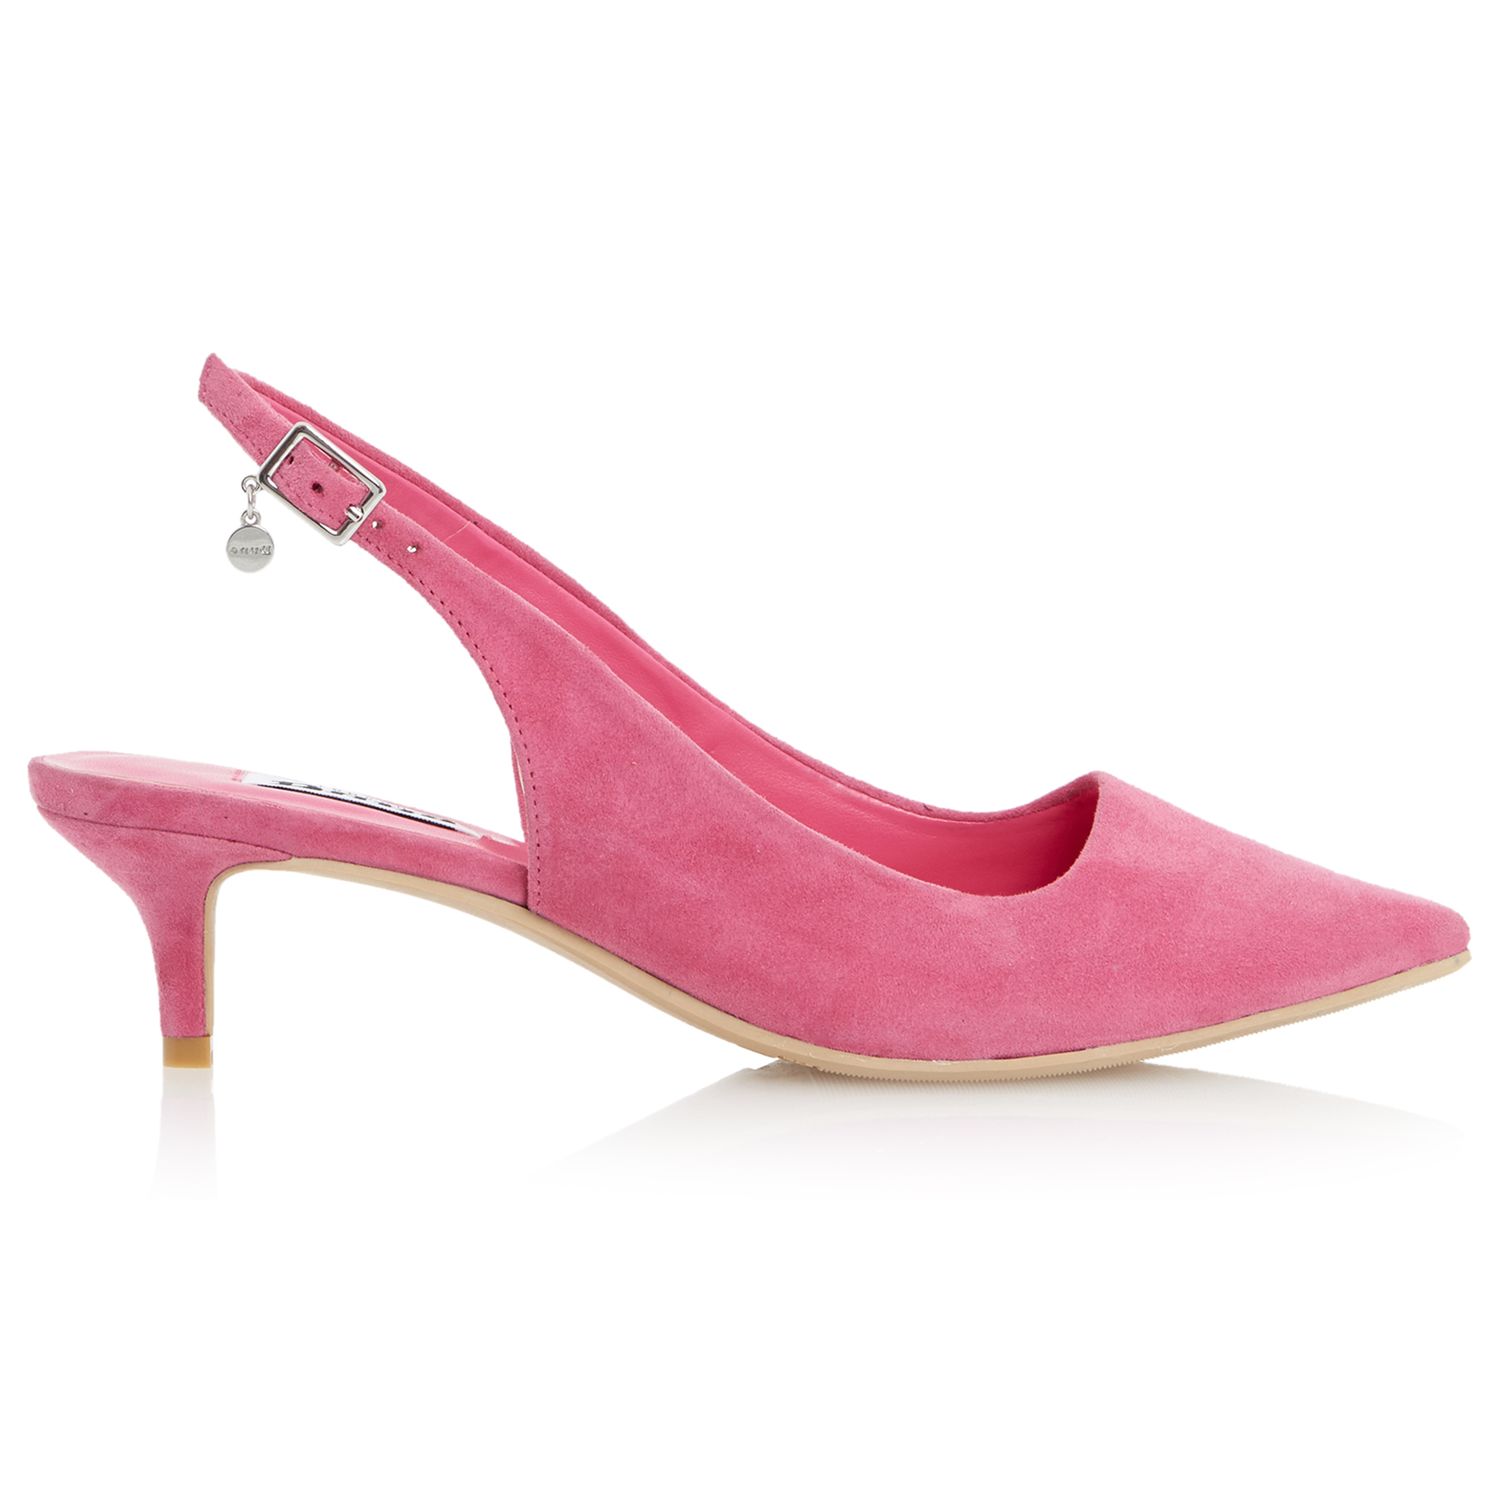 Dune Cathryn Slingback Kitten Heel Court Shoes, Pink Suede at John ...